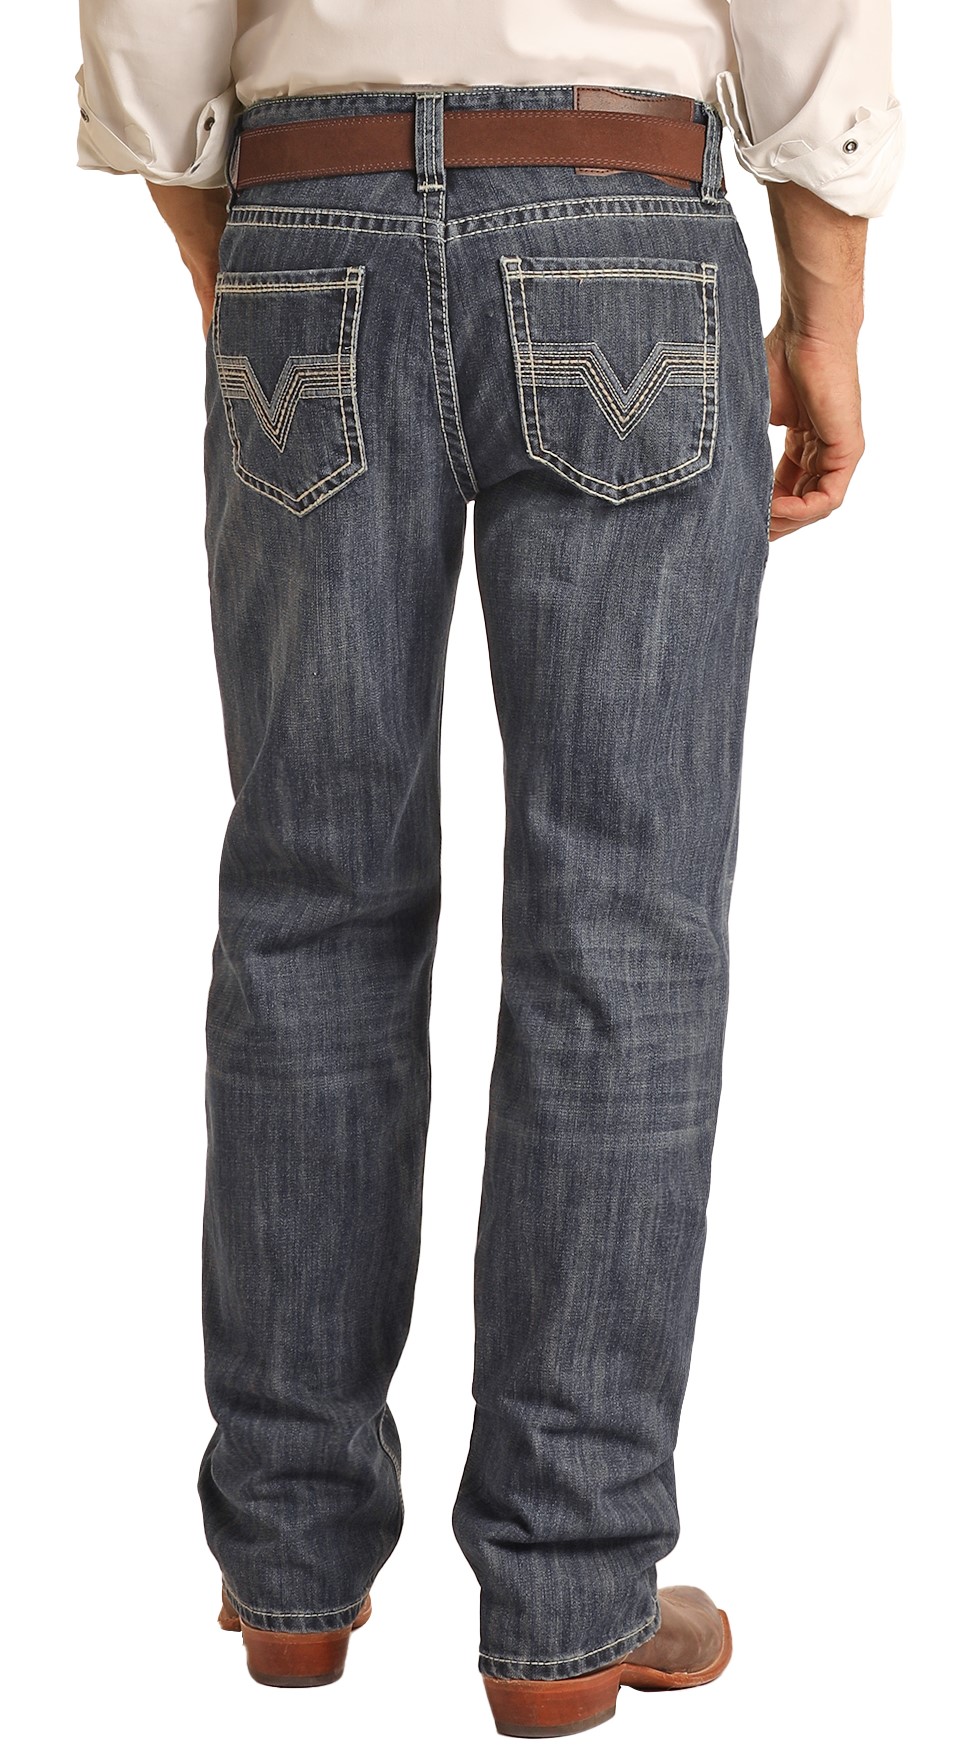 Men's Relaxed Fit Raised Denim Medium Wash Straight Bootcut Jeans